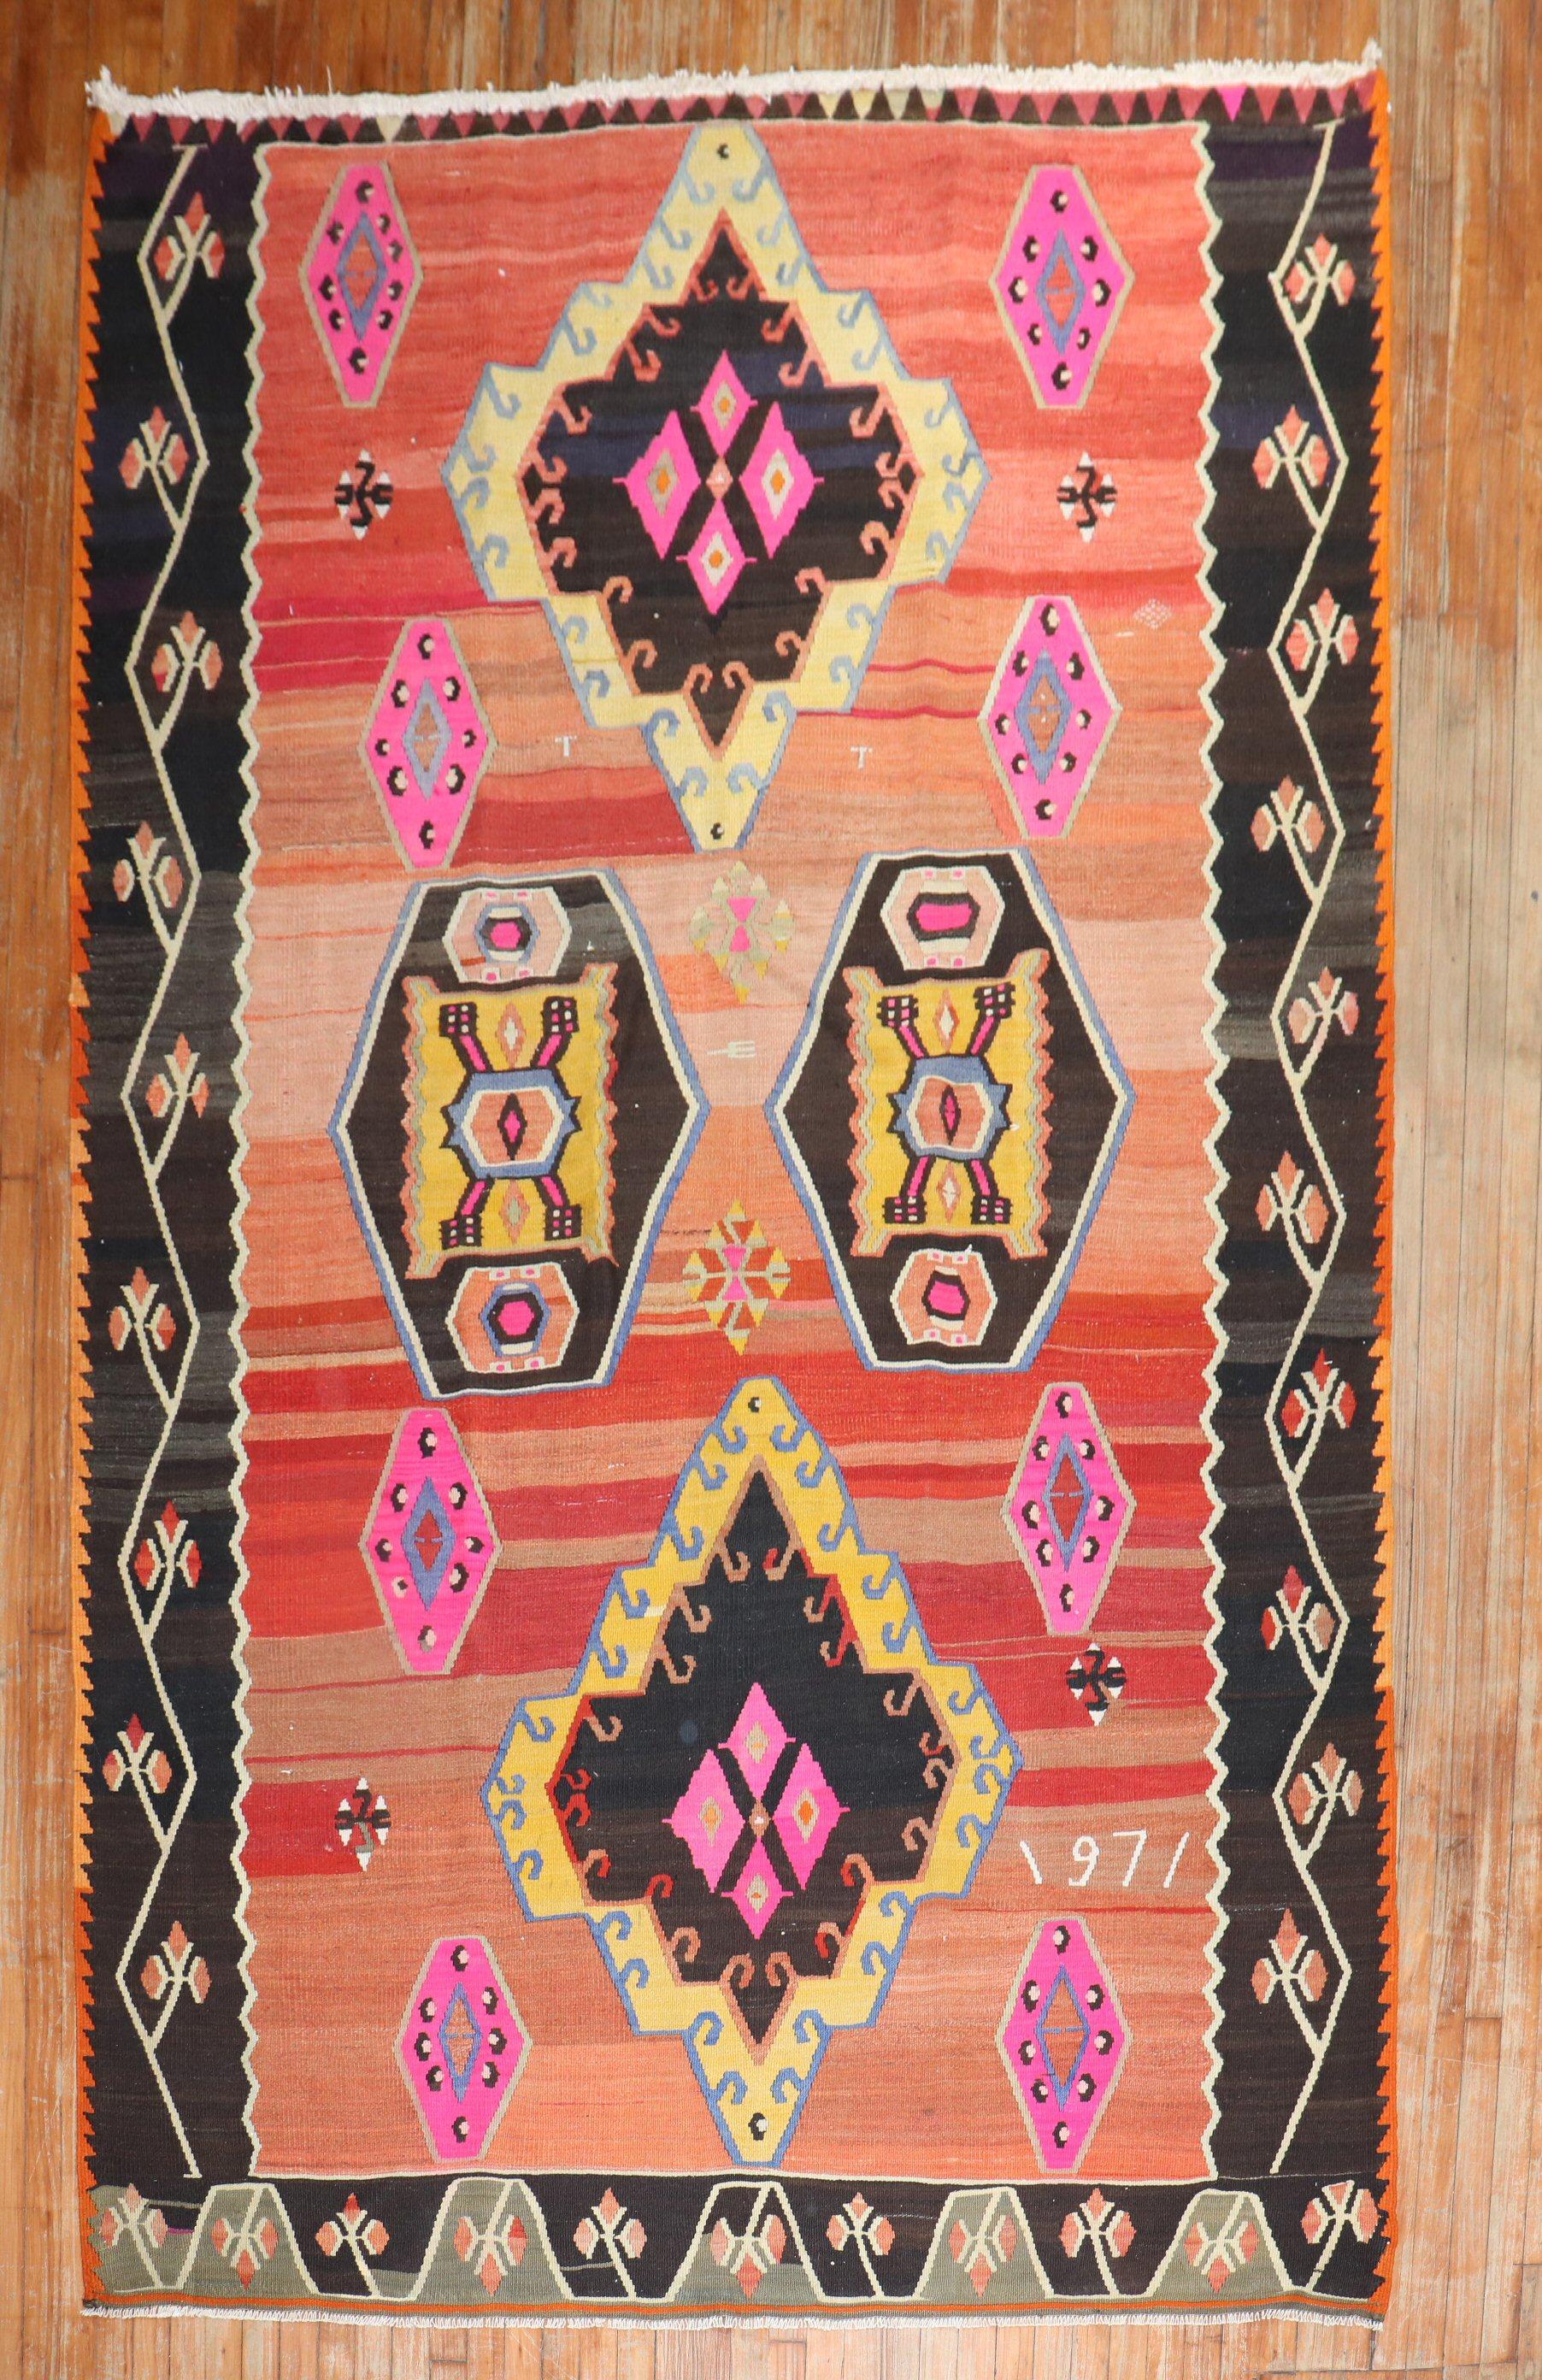 A small Room size one-of-a-kind 3rd quarter of the 20th century Turkish Kilim with an all-over geometric large-scale pattern 

Measures: 6' x 10'5''.